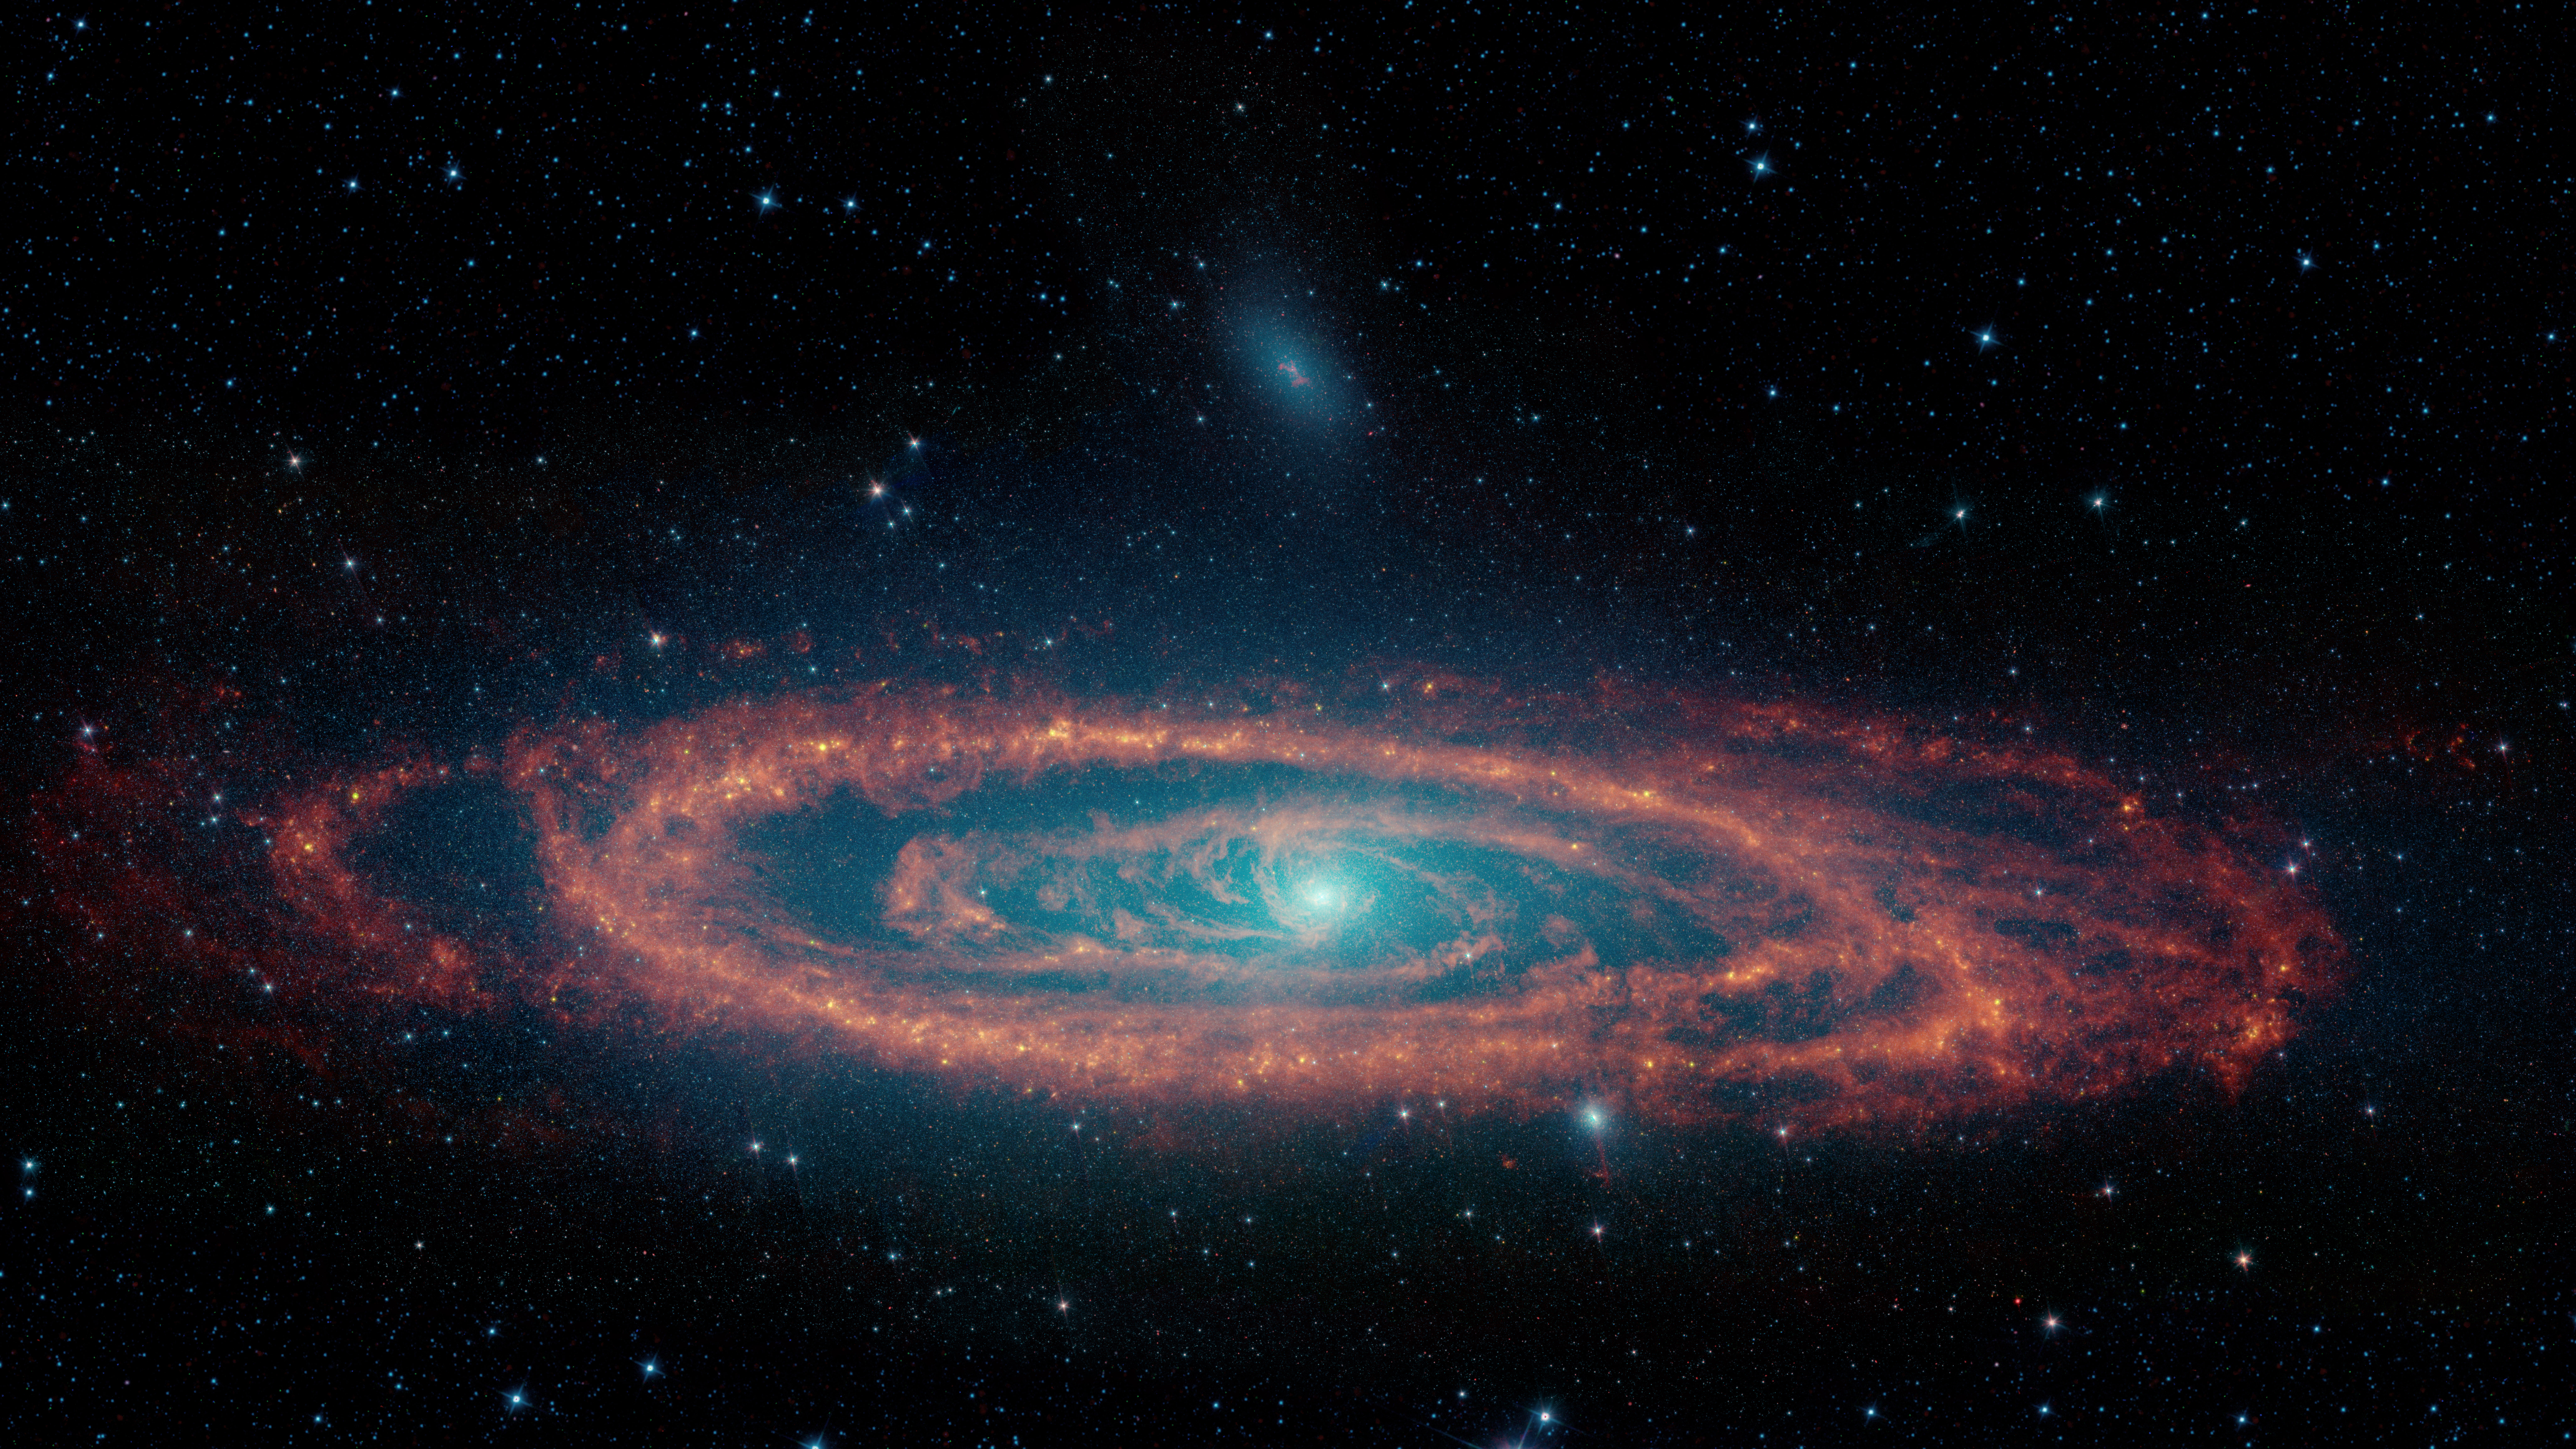 These images of the Andromeda galaxy use data from NASA's retired Spitzer Space Telescope. Multiple wavelengths are shown in the image on the left, revealing stars, dust, and areas of star formation. The image on the right shows dust only, making it easier to see the galaxy's underlying structure.